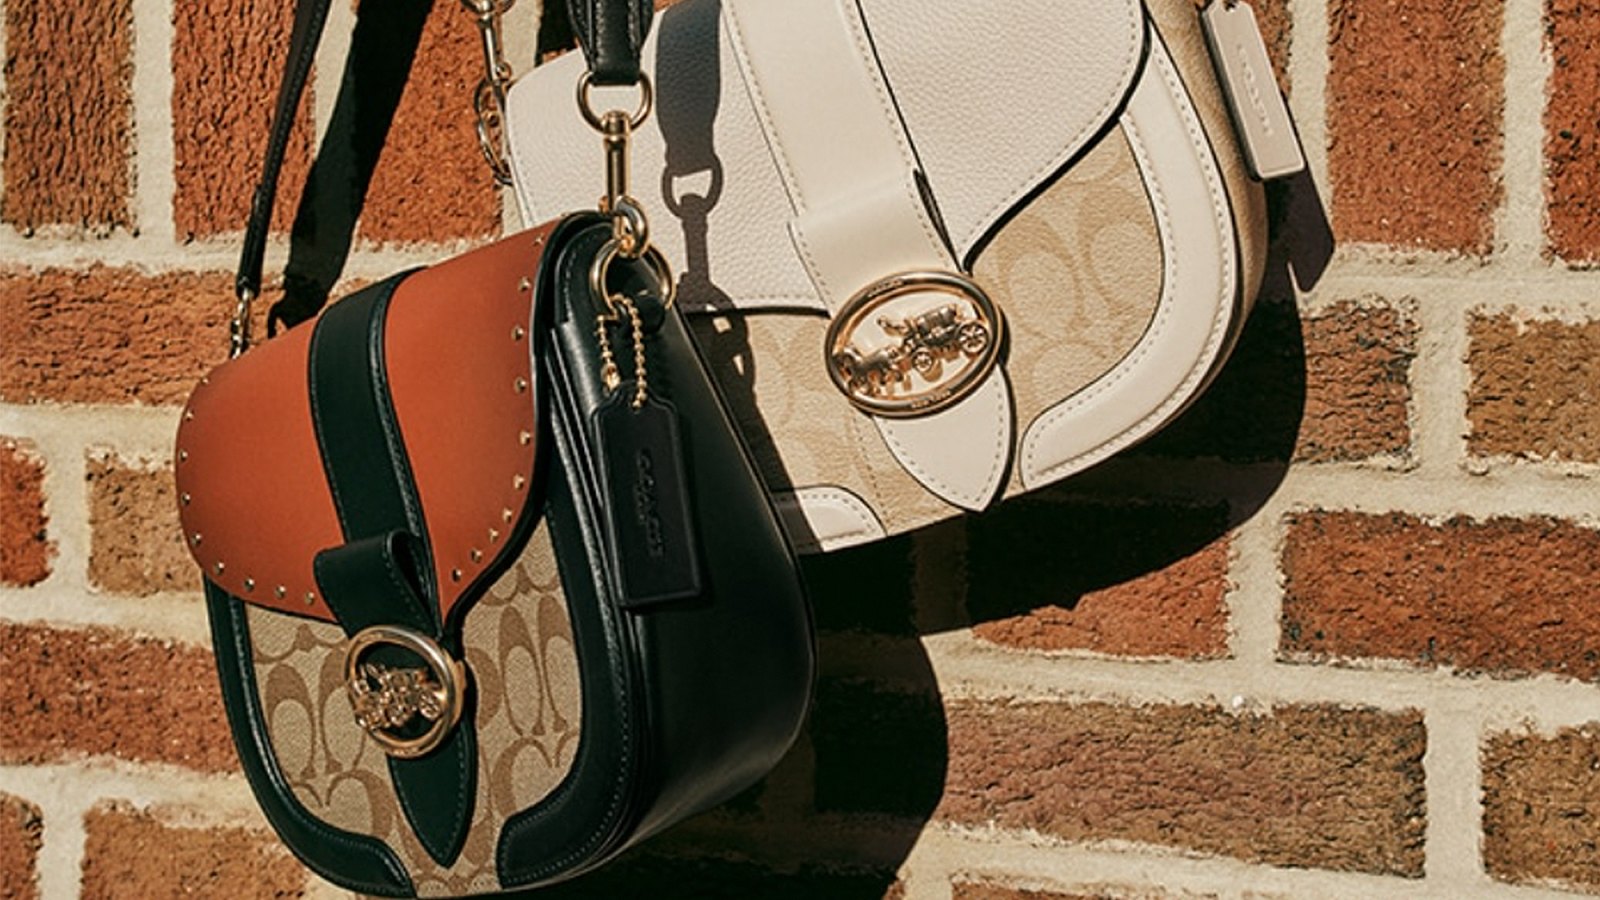 Holiday handbag deal: Save up to 70% off Coach Outlet today - CNET